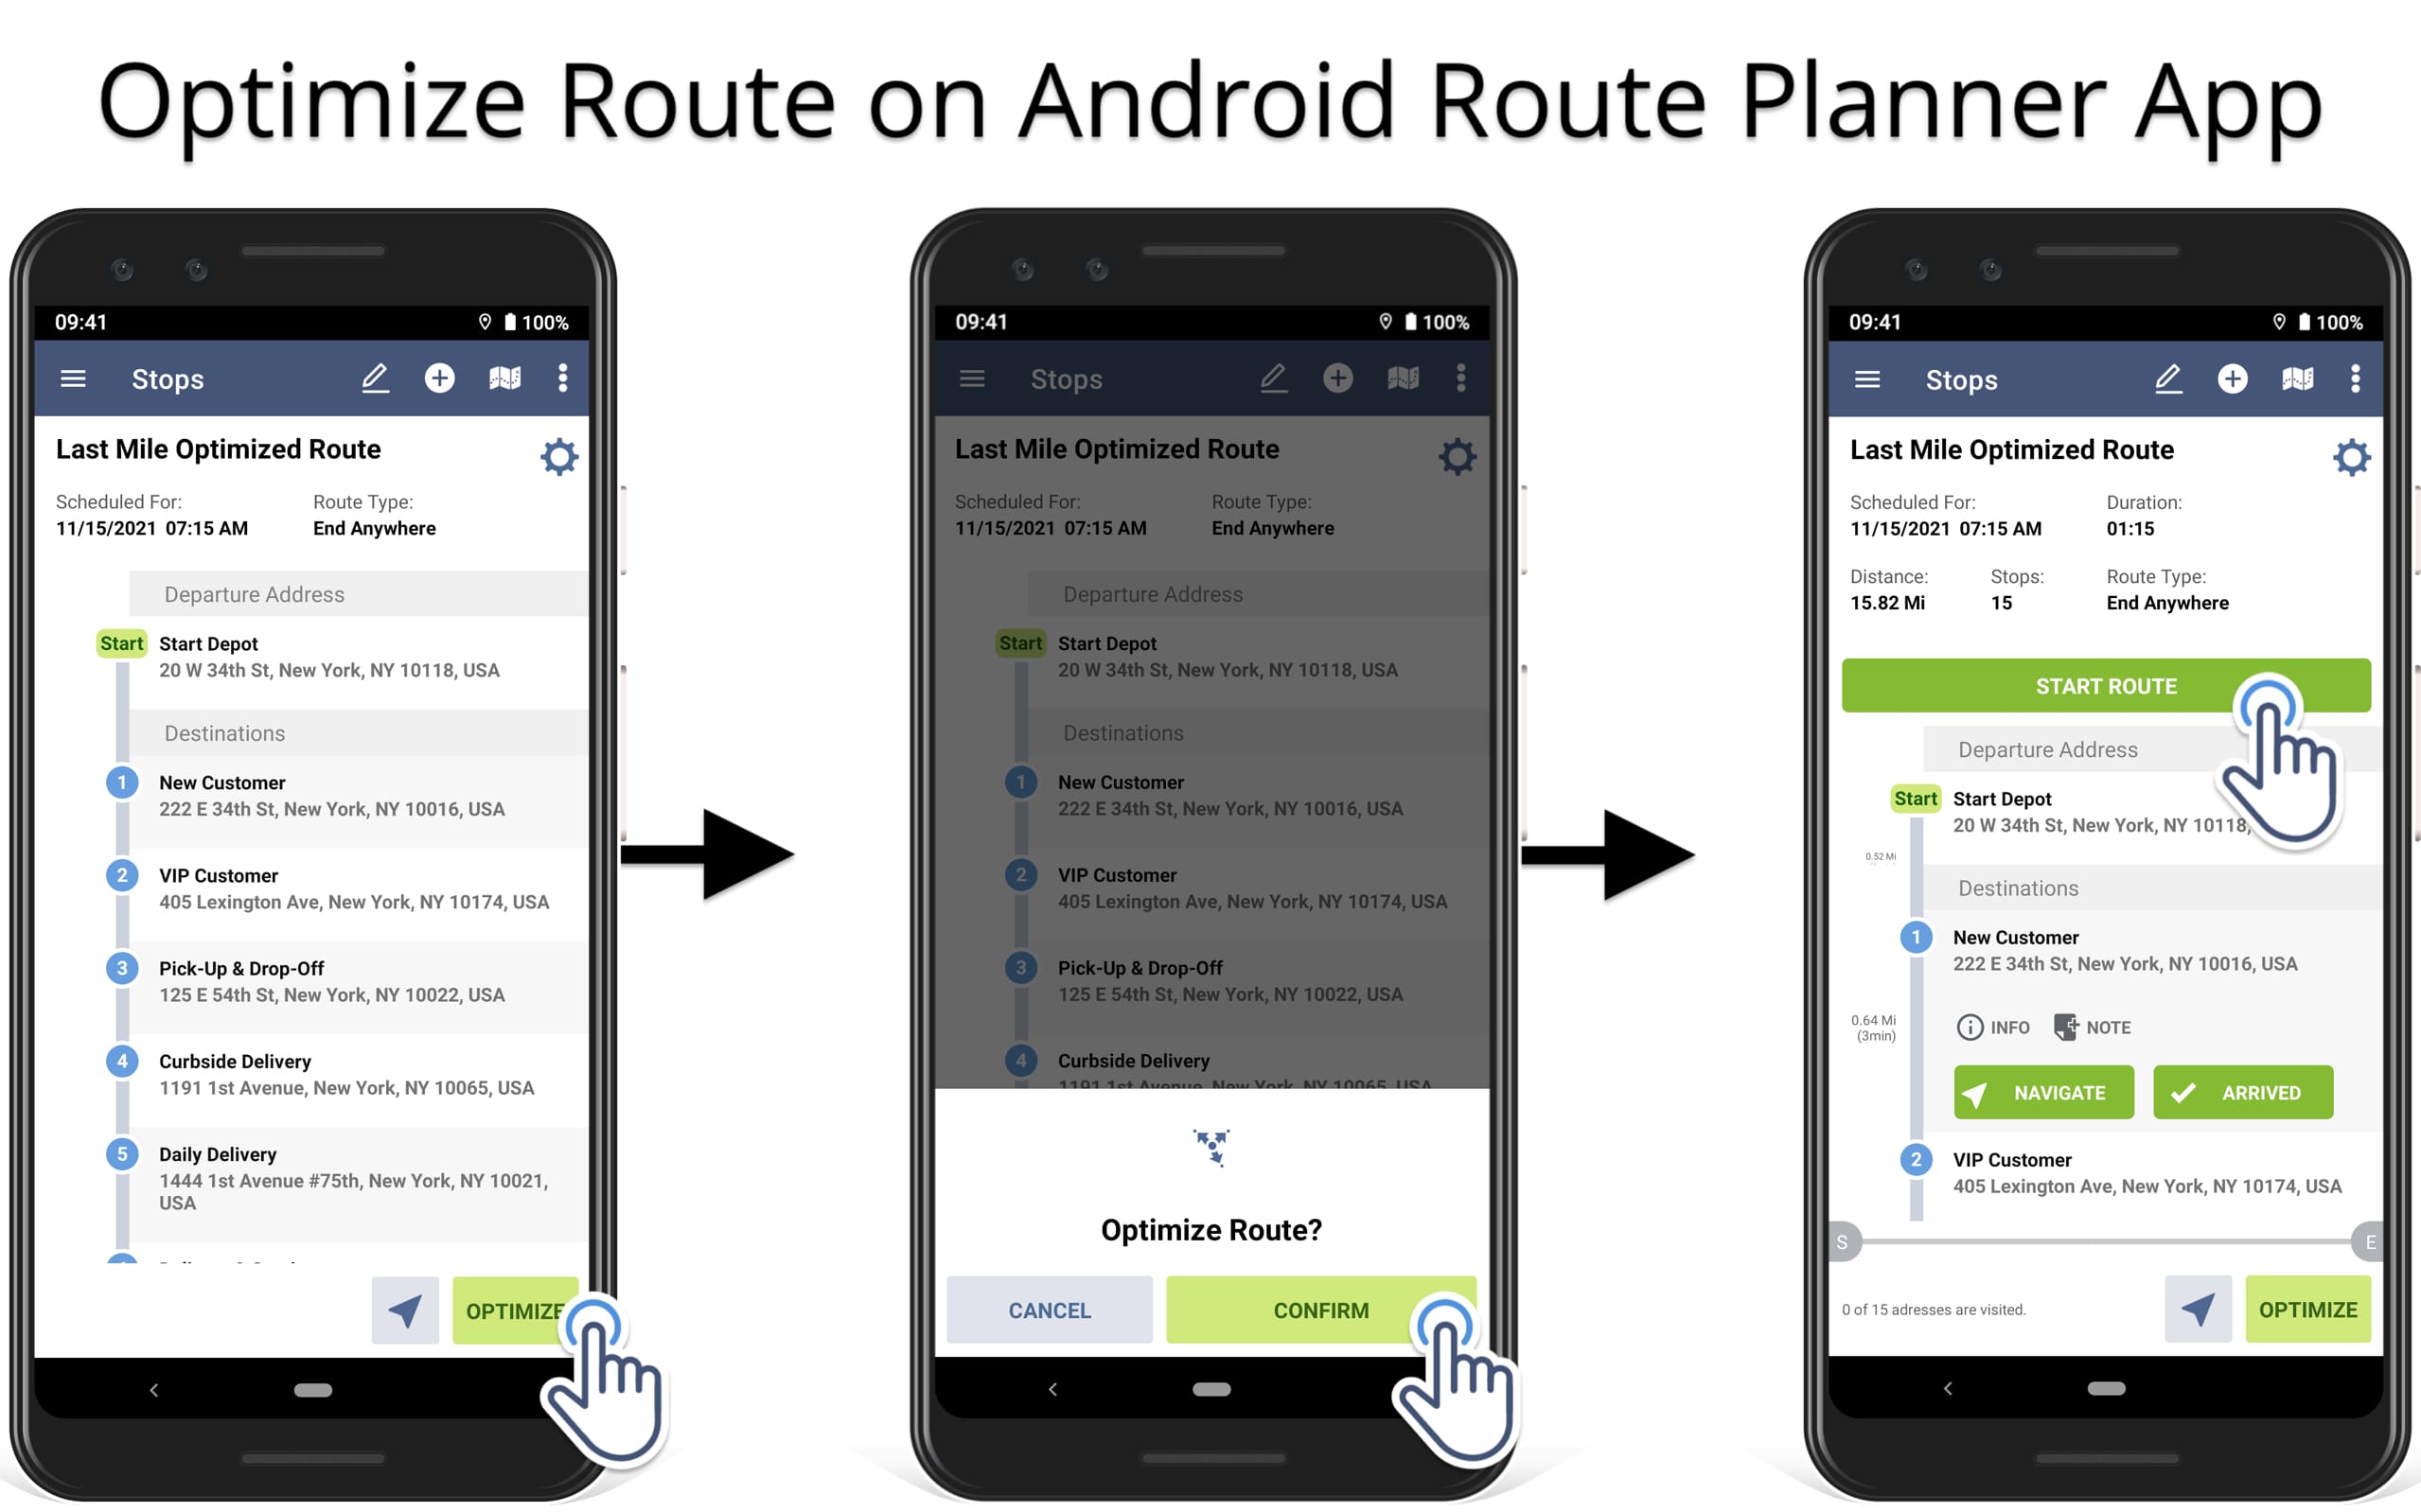 Optimize route on route planner app for delivery drivers and field service